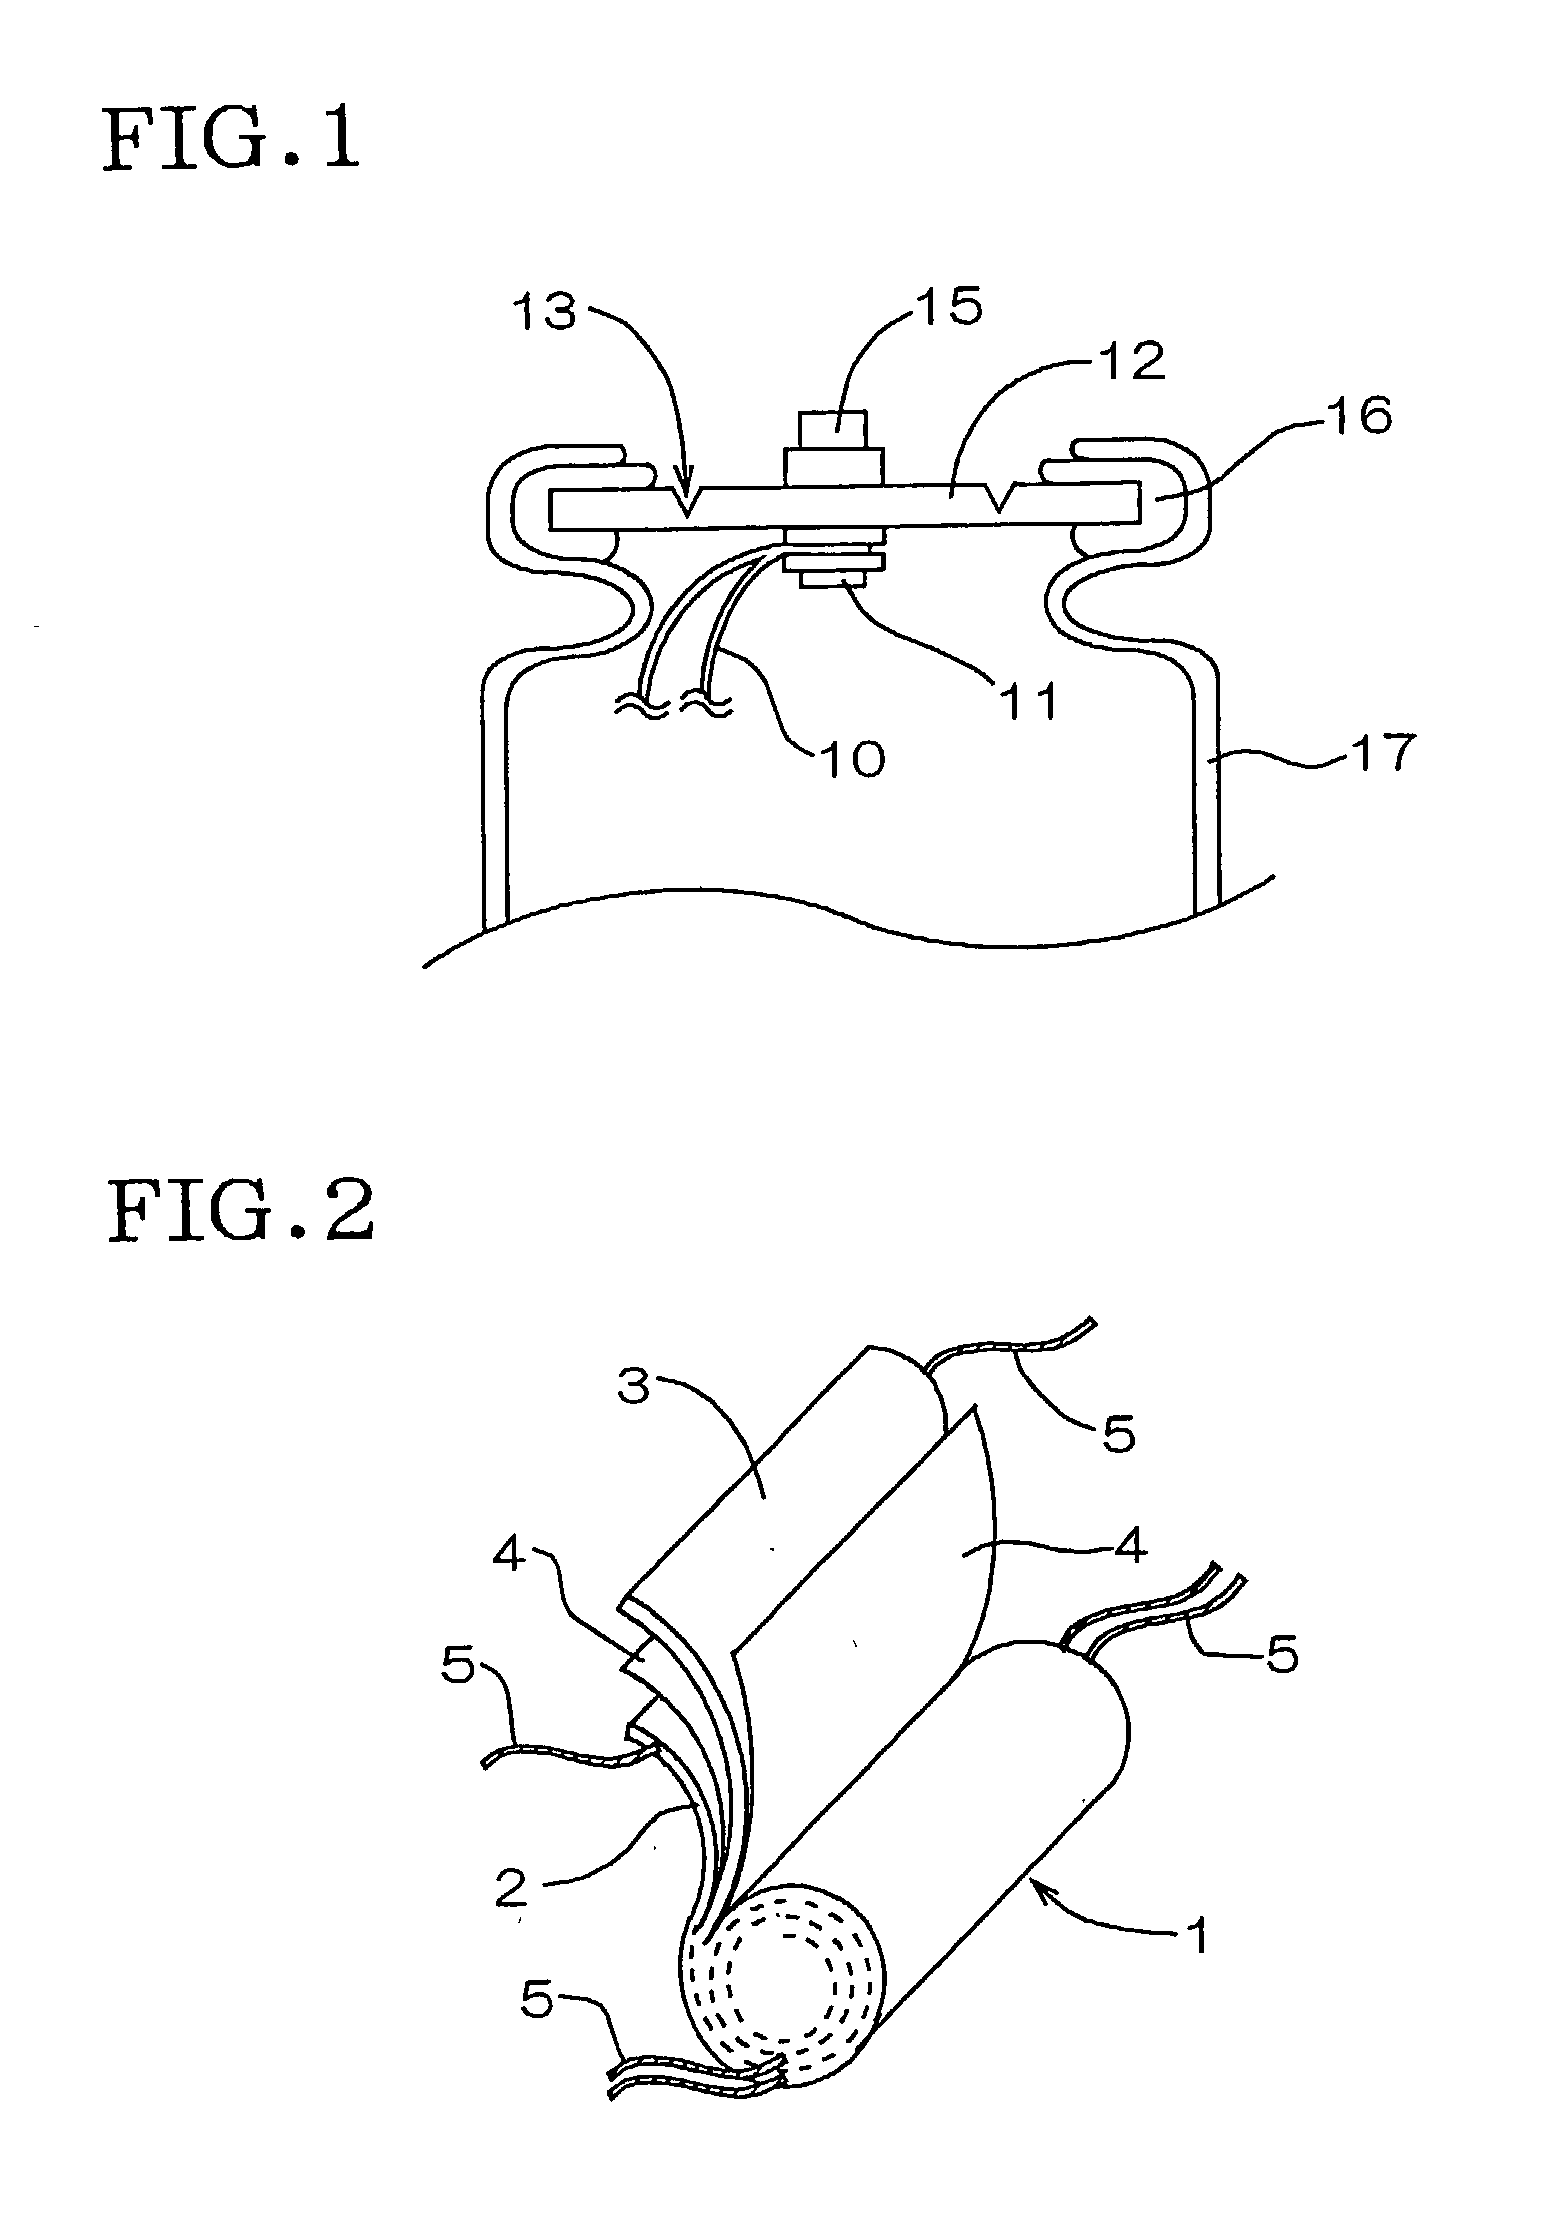 Lithium secondary battery for use in electric vehicle